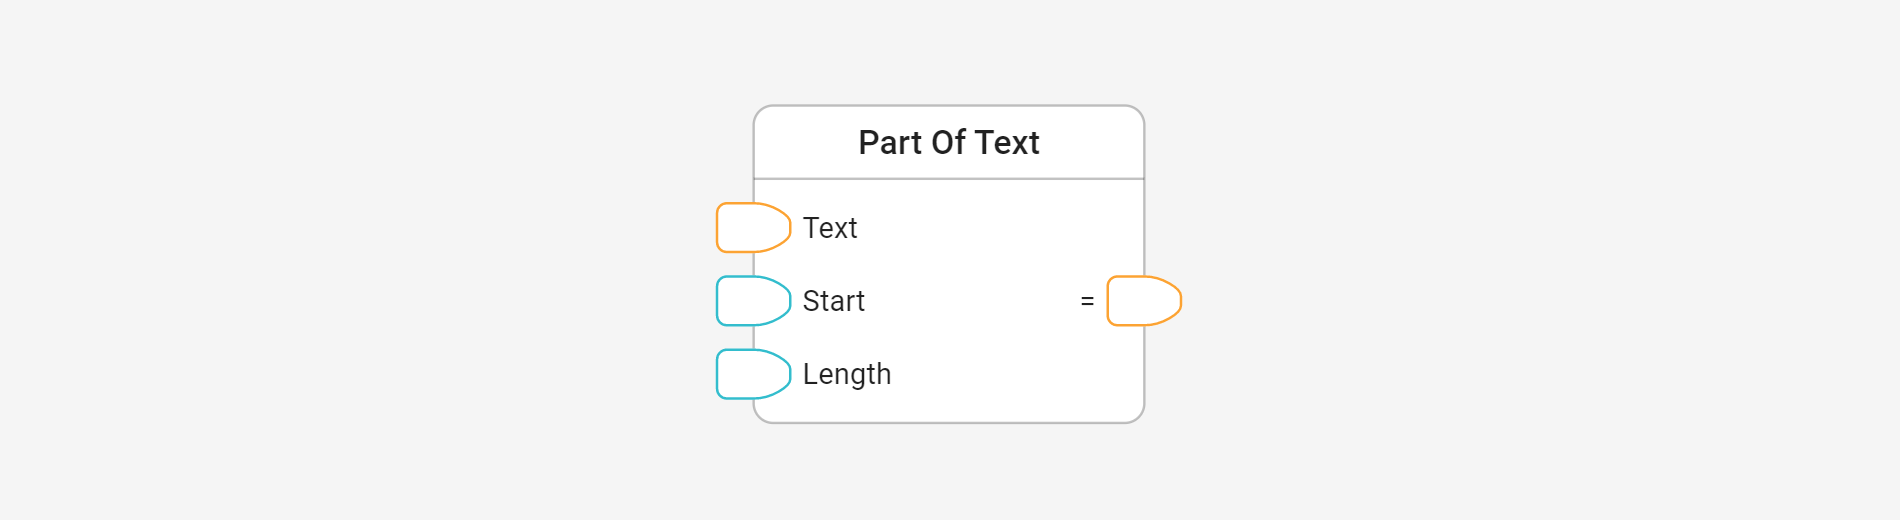 Get a part of a text in Centrldesk